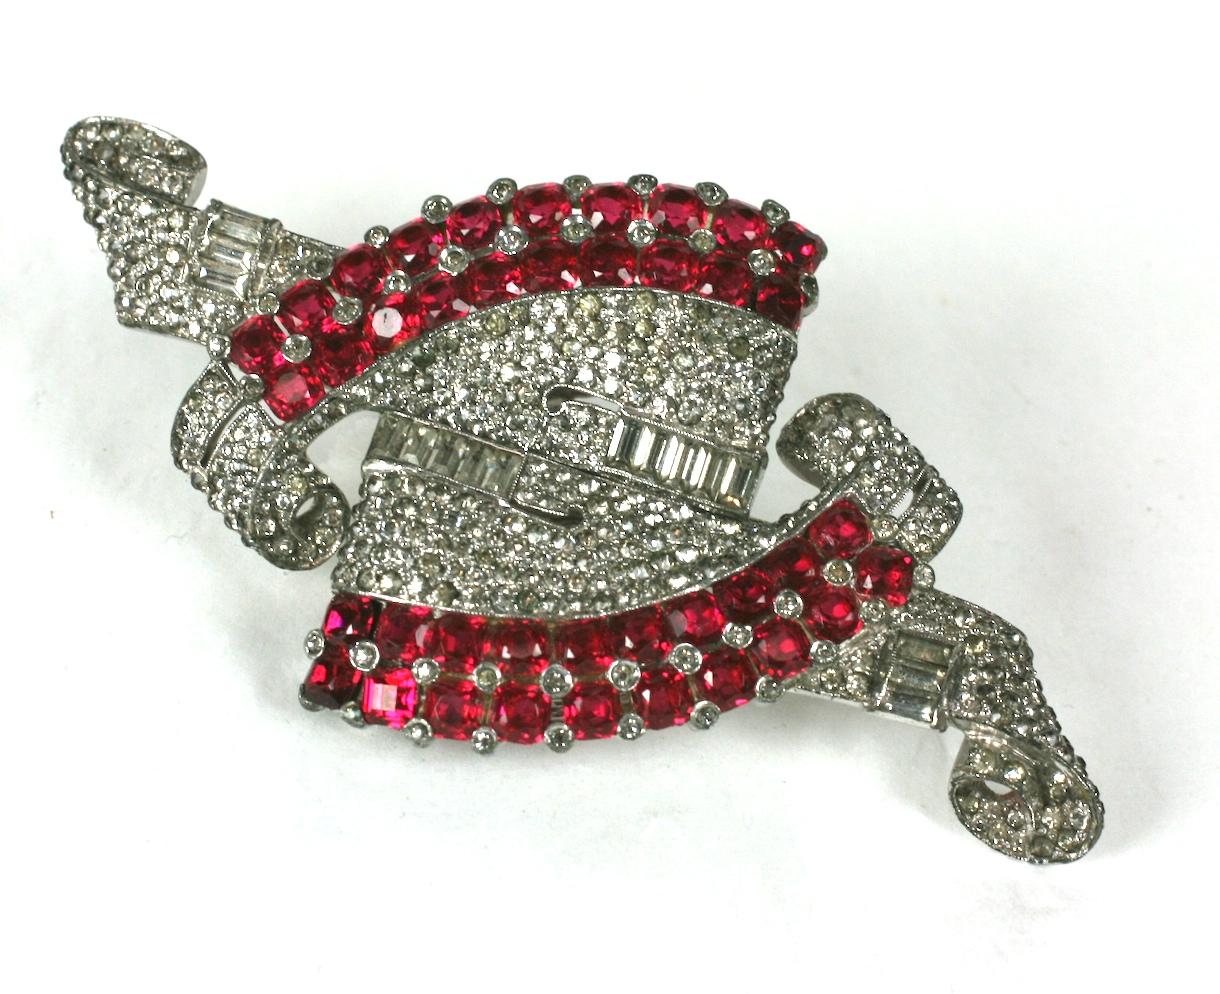 Spectacular and Rare Marcel Boucher Duette Brooch from the 1930's. Pair of pave crystal Art Deco clips are removable from pin 